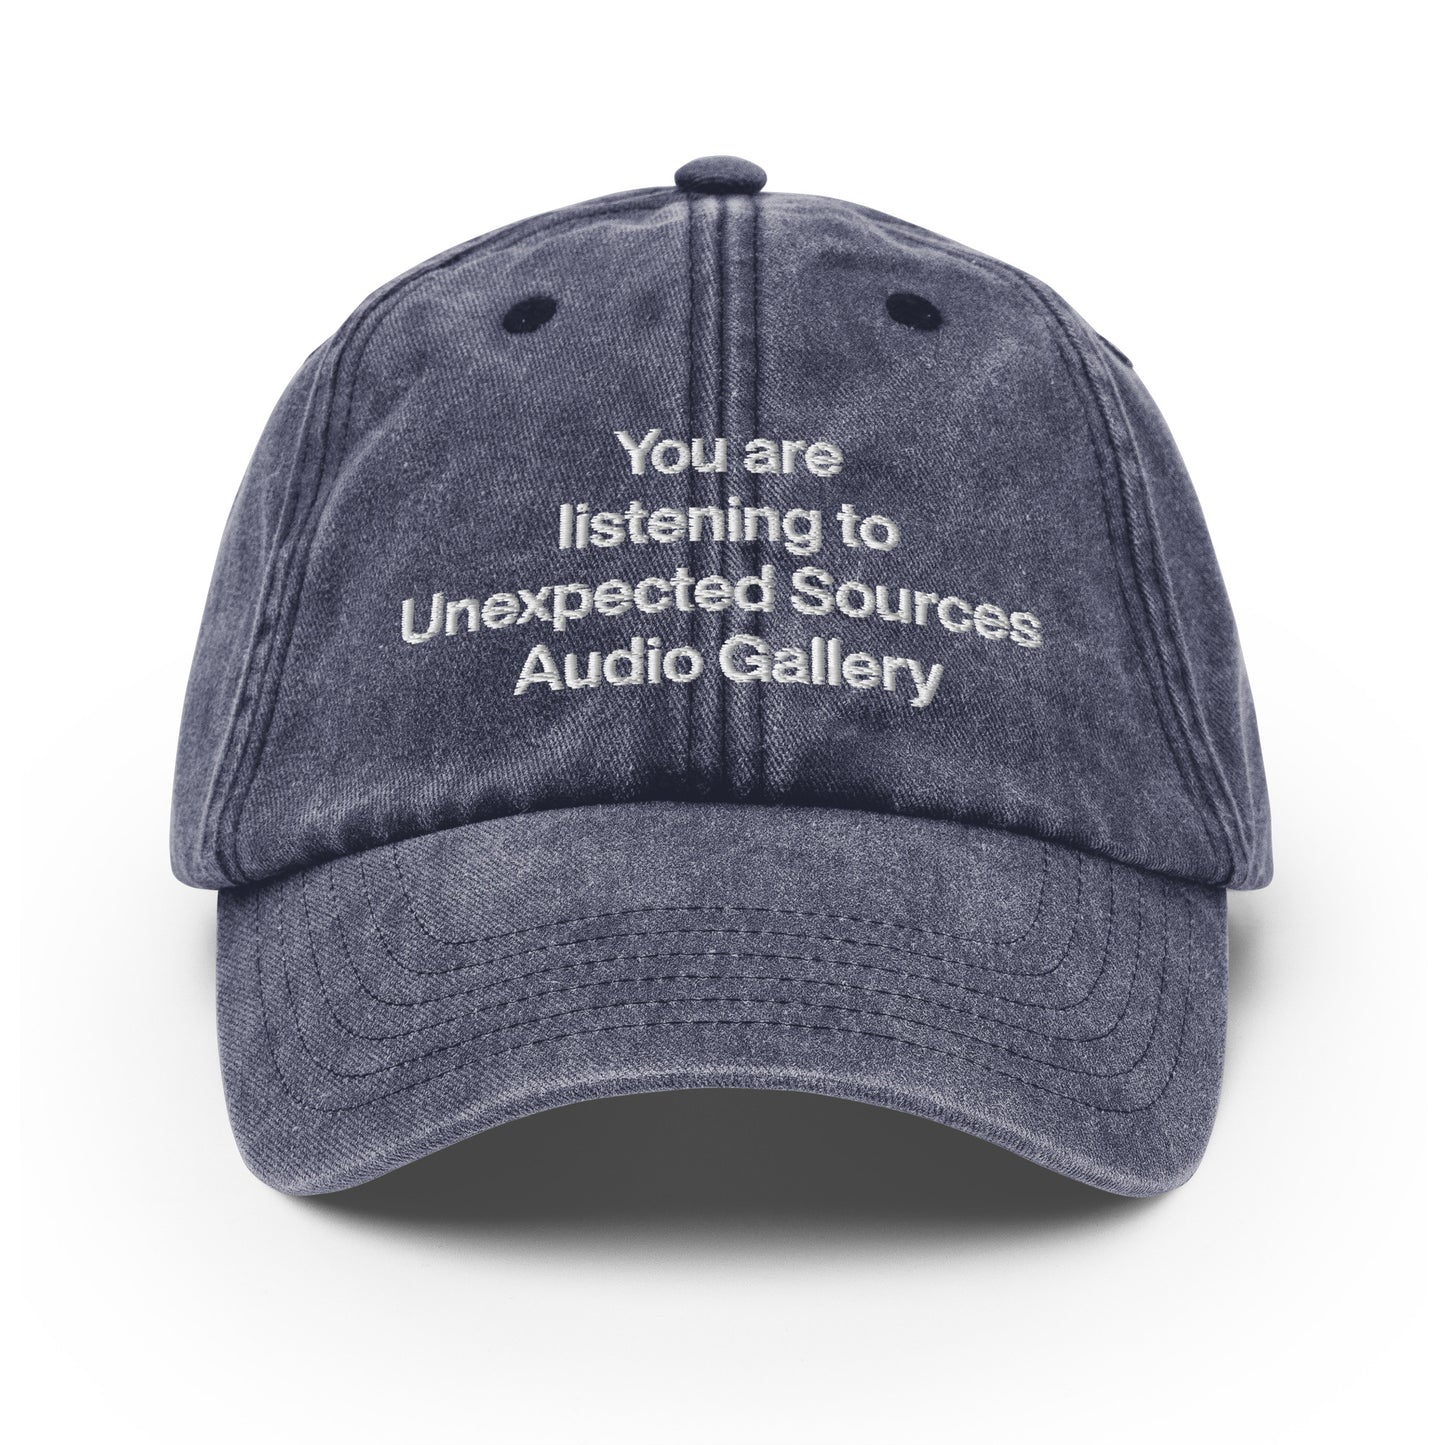 You are listening to Unexpected Sources Audio Gallery _ jingle cap _ 007